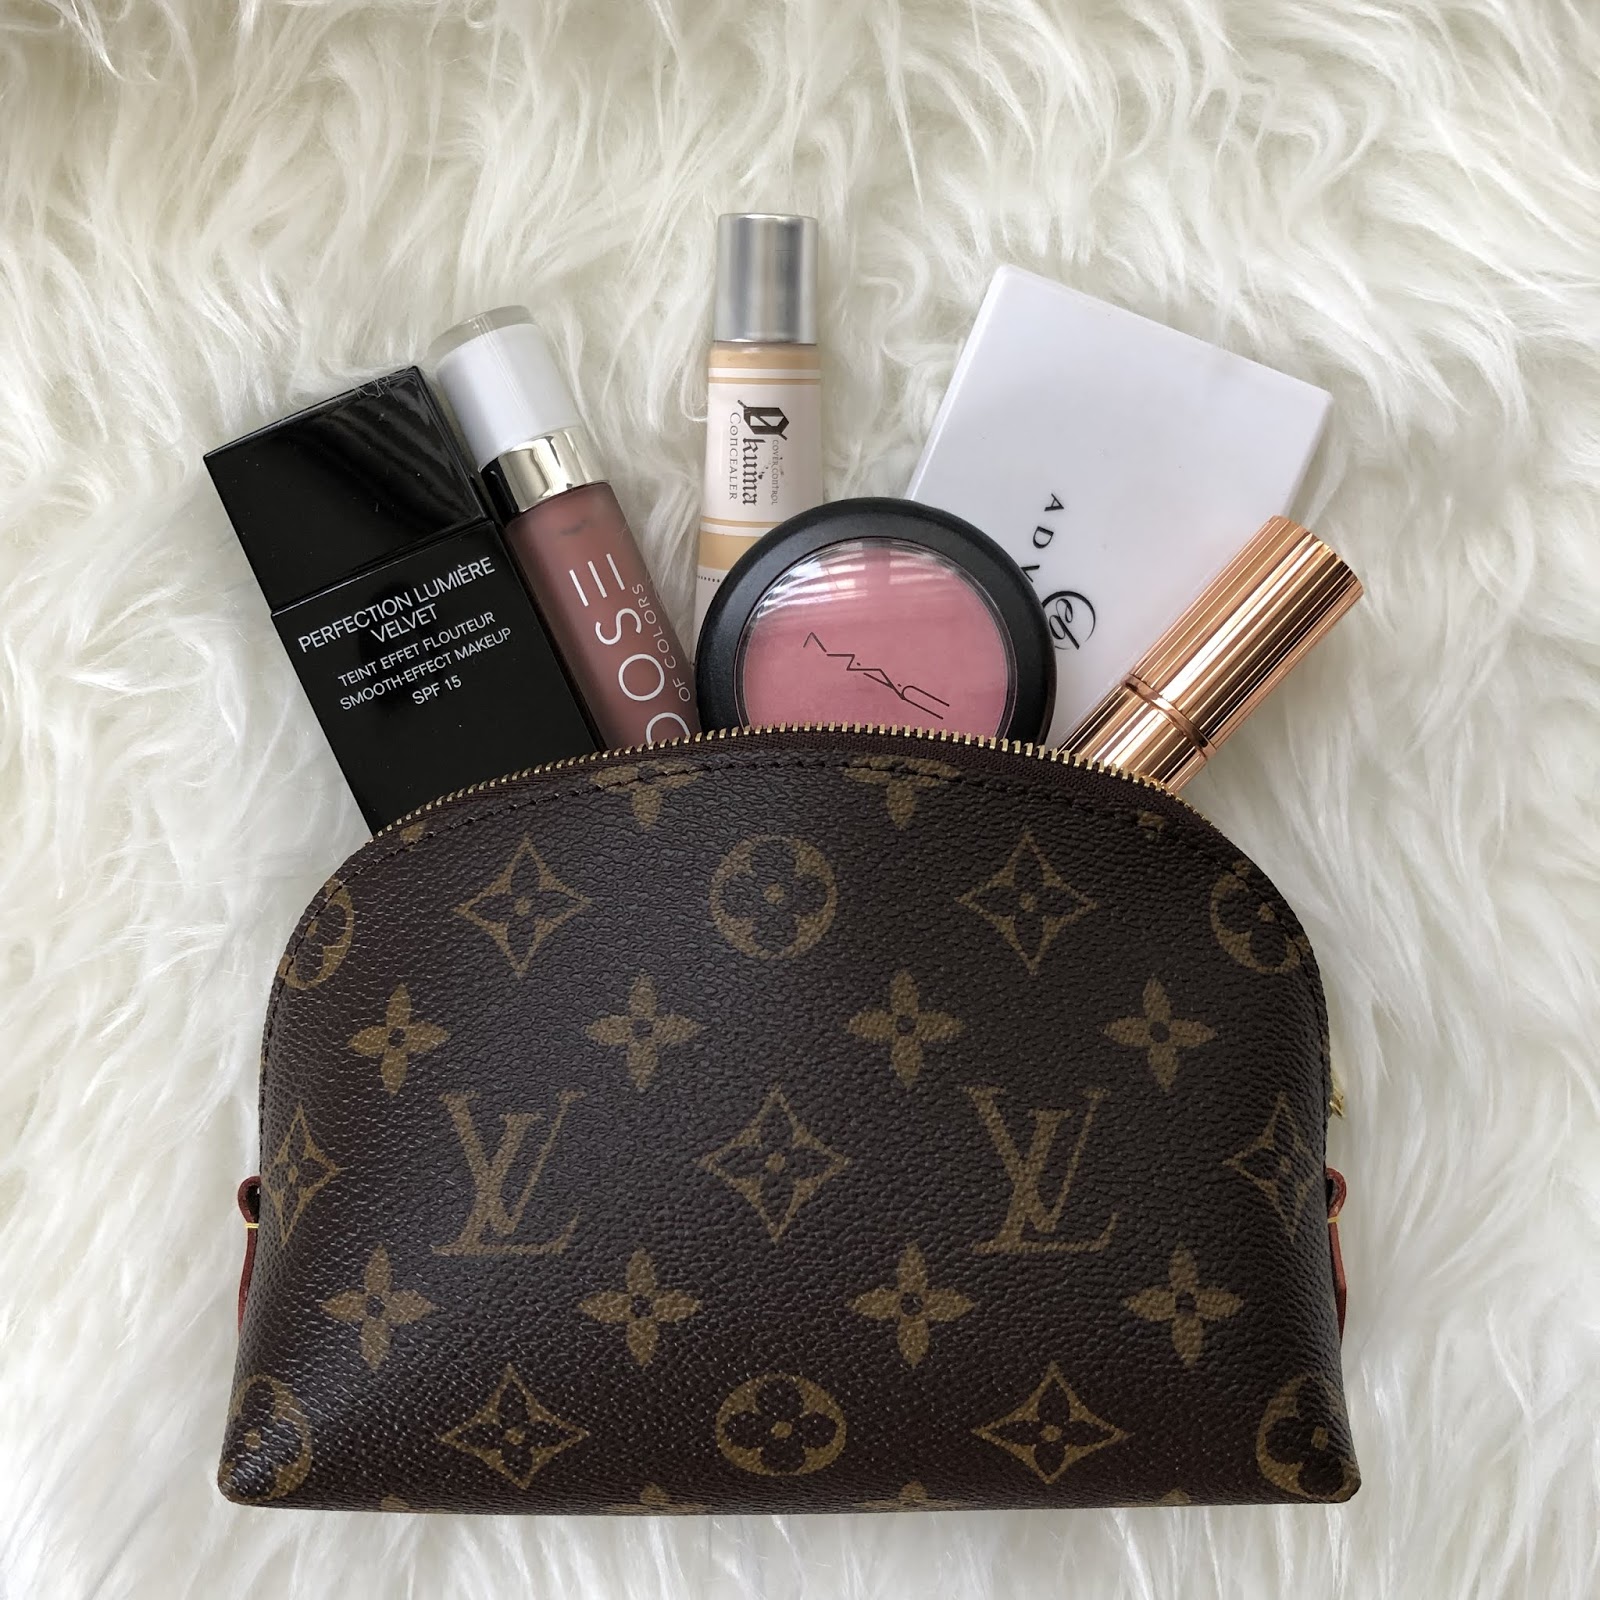 WHAT'S IN MY LOUIS VUITTON COSMETIC POUCH? - A FULL REVIEW 